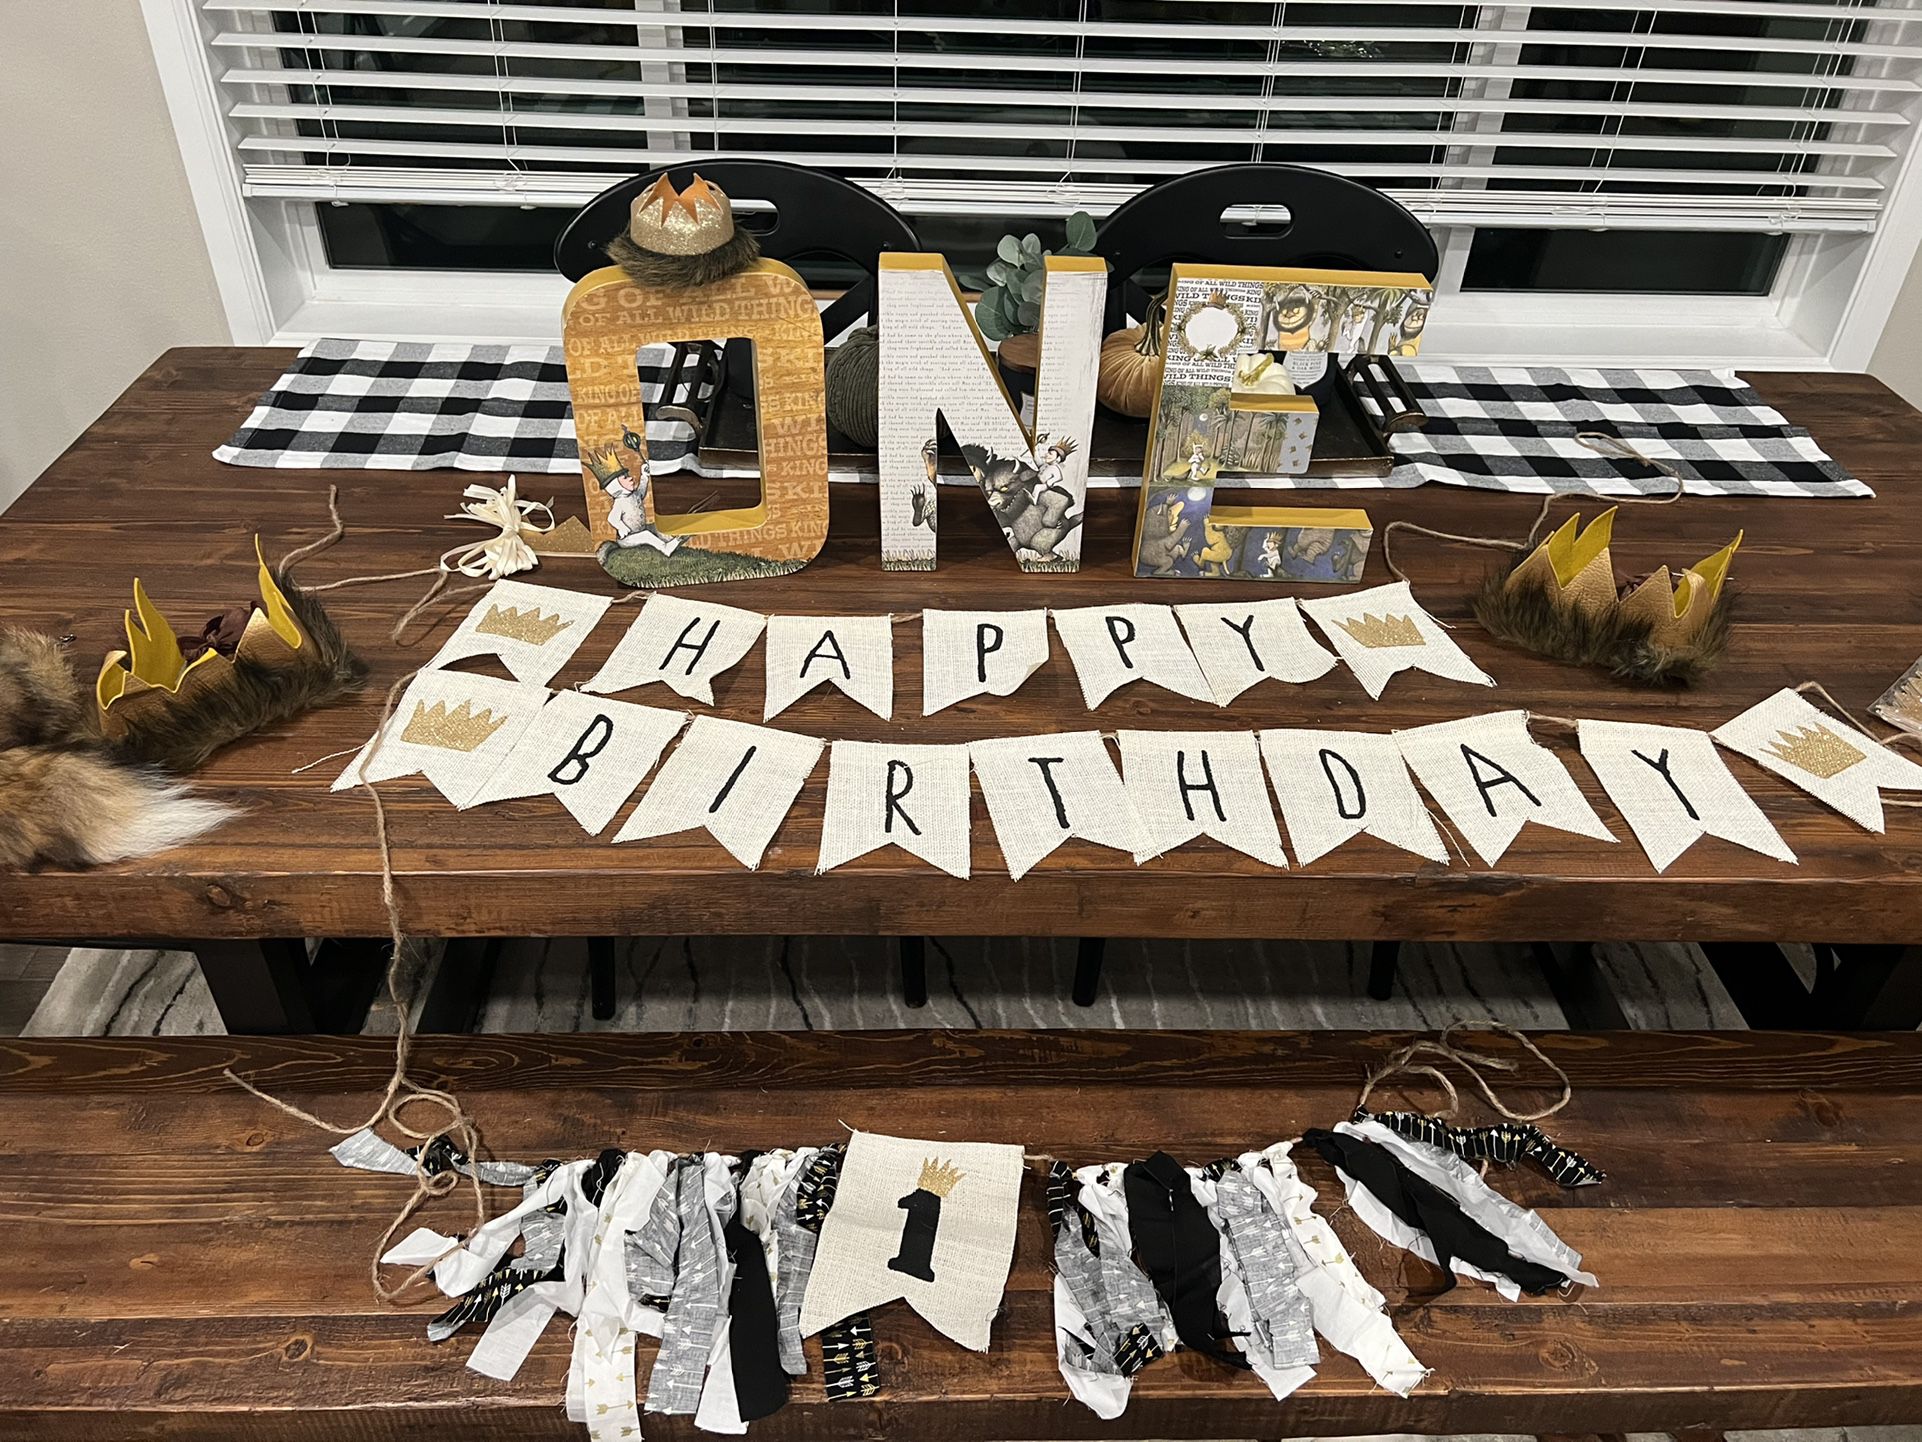 Complete Decor for 1 Year Old "Wild One" Birthday Party.